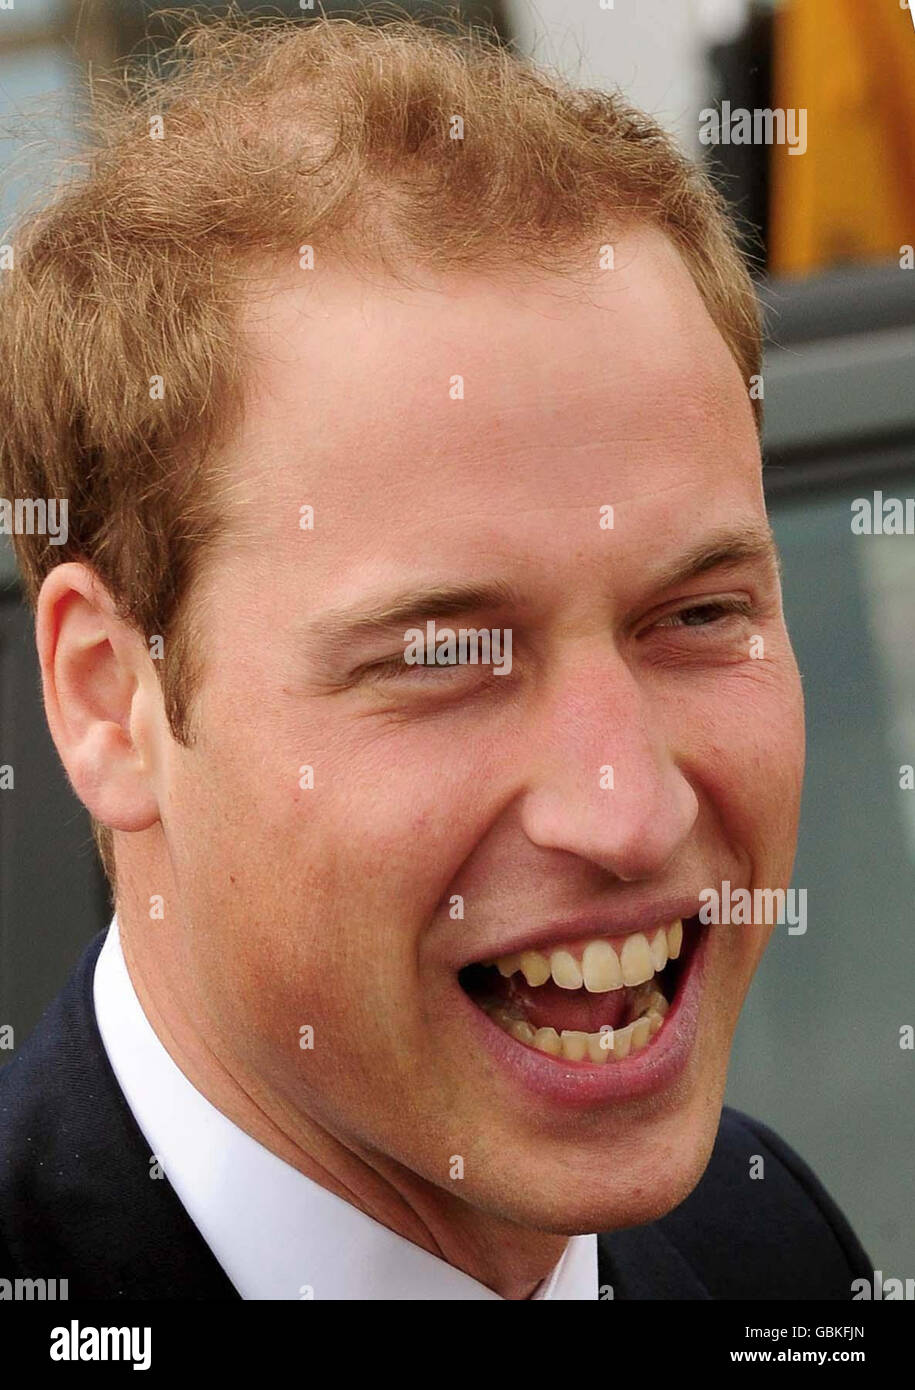 Prince William arrives for a visit to the World Headquarters of JCB, one of the world's largest manufacturers of construction equipment, to mark the production of the company's 750,000th machine in Rocester, Staffordshire. Stock Photo